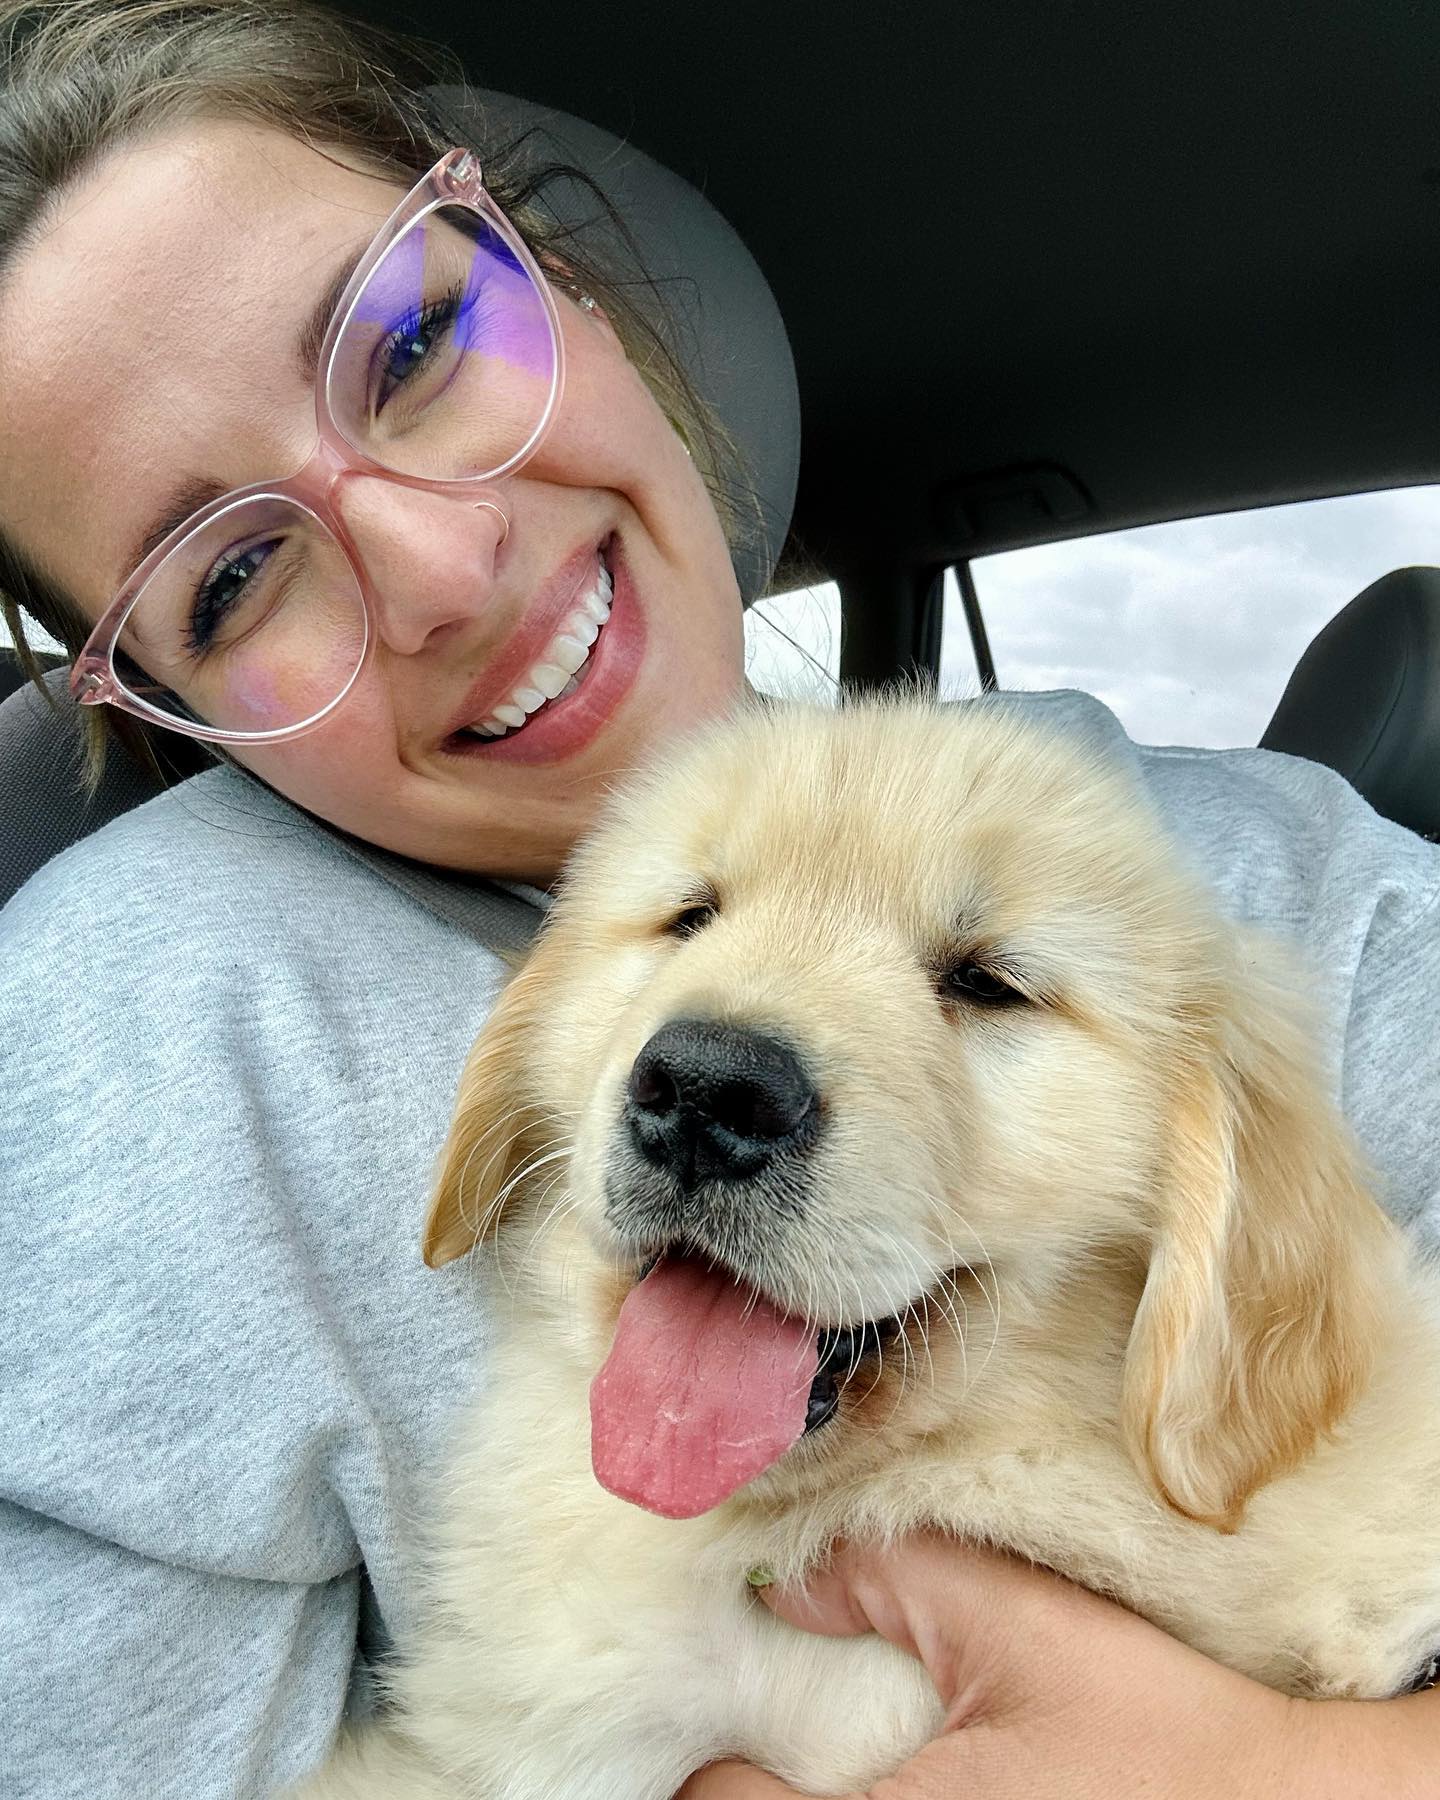 Woman with a big smile holding a golden retriever puppy.